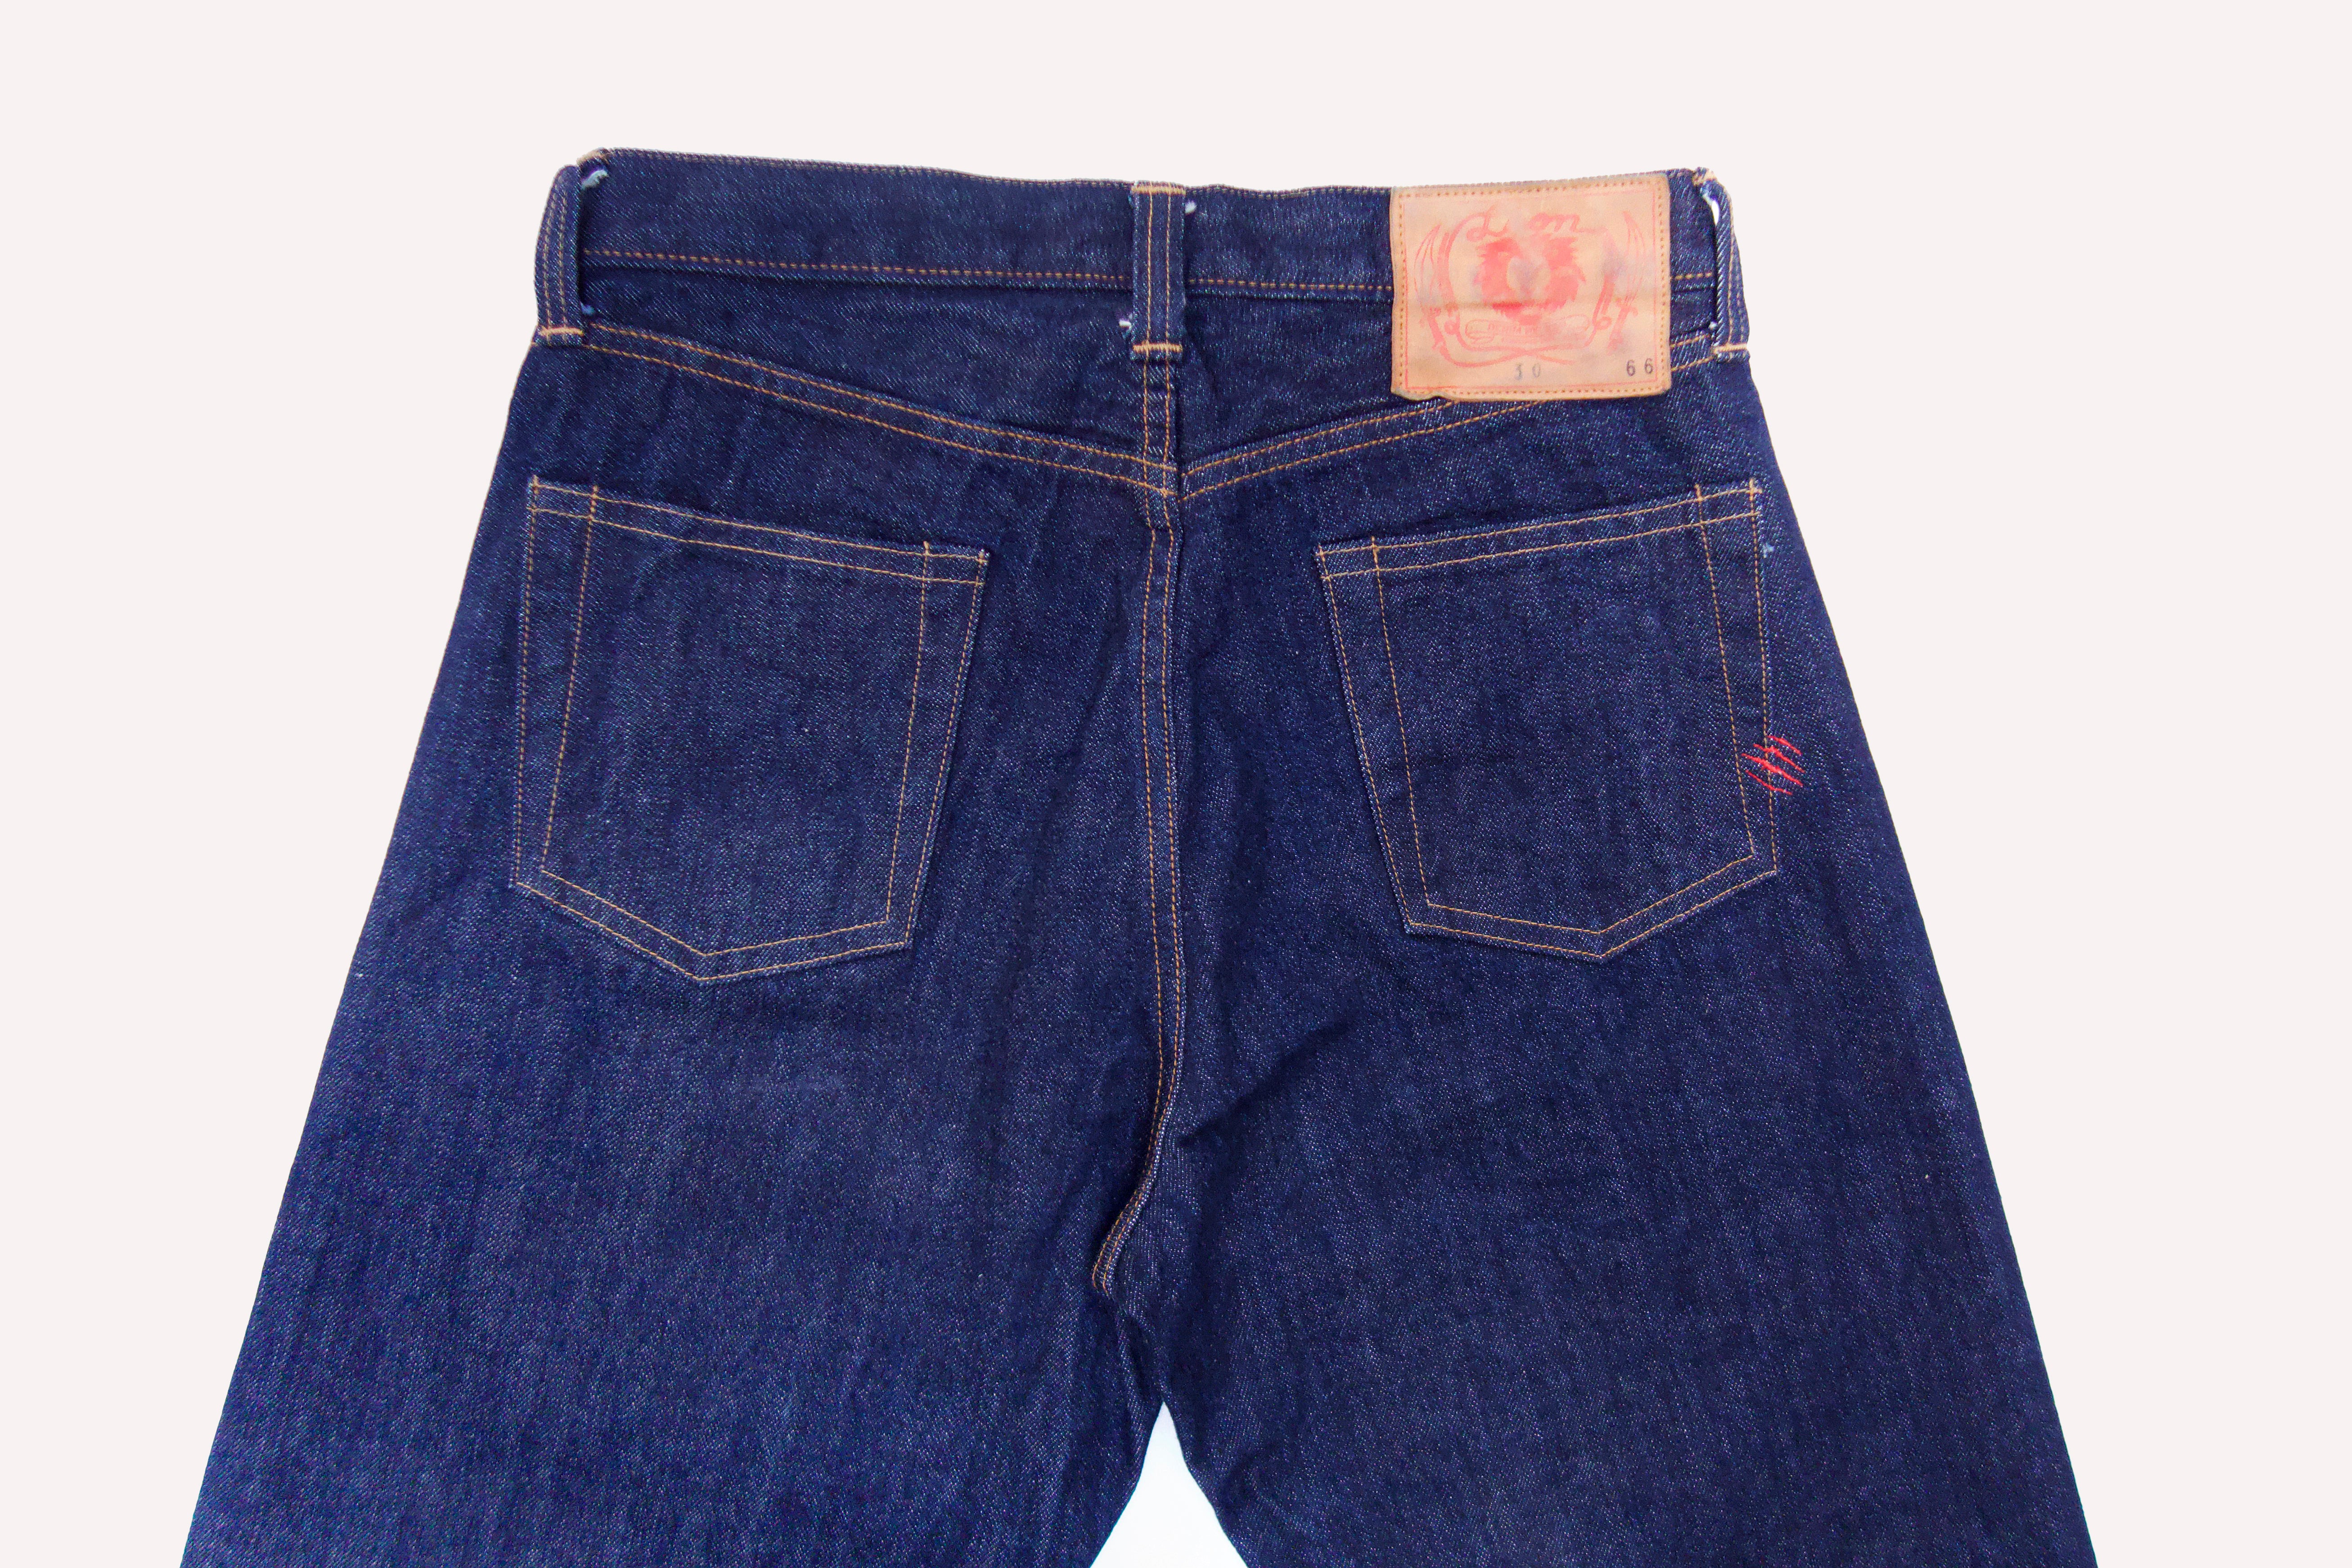 LD 1966 Jeans in new 14 oz. Repro Denim from Collect Japan